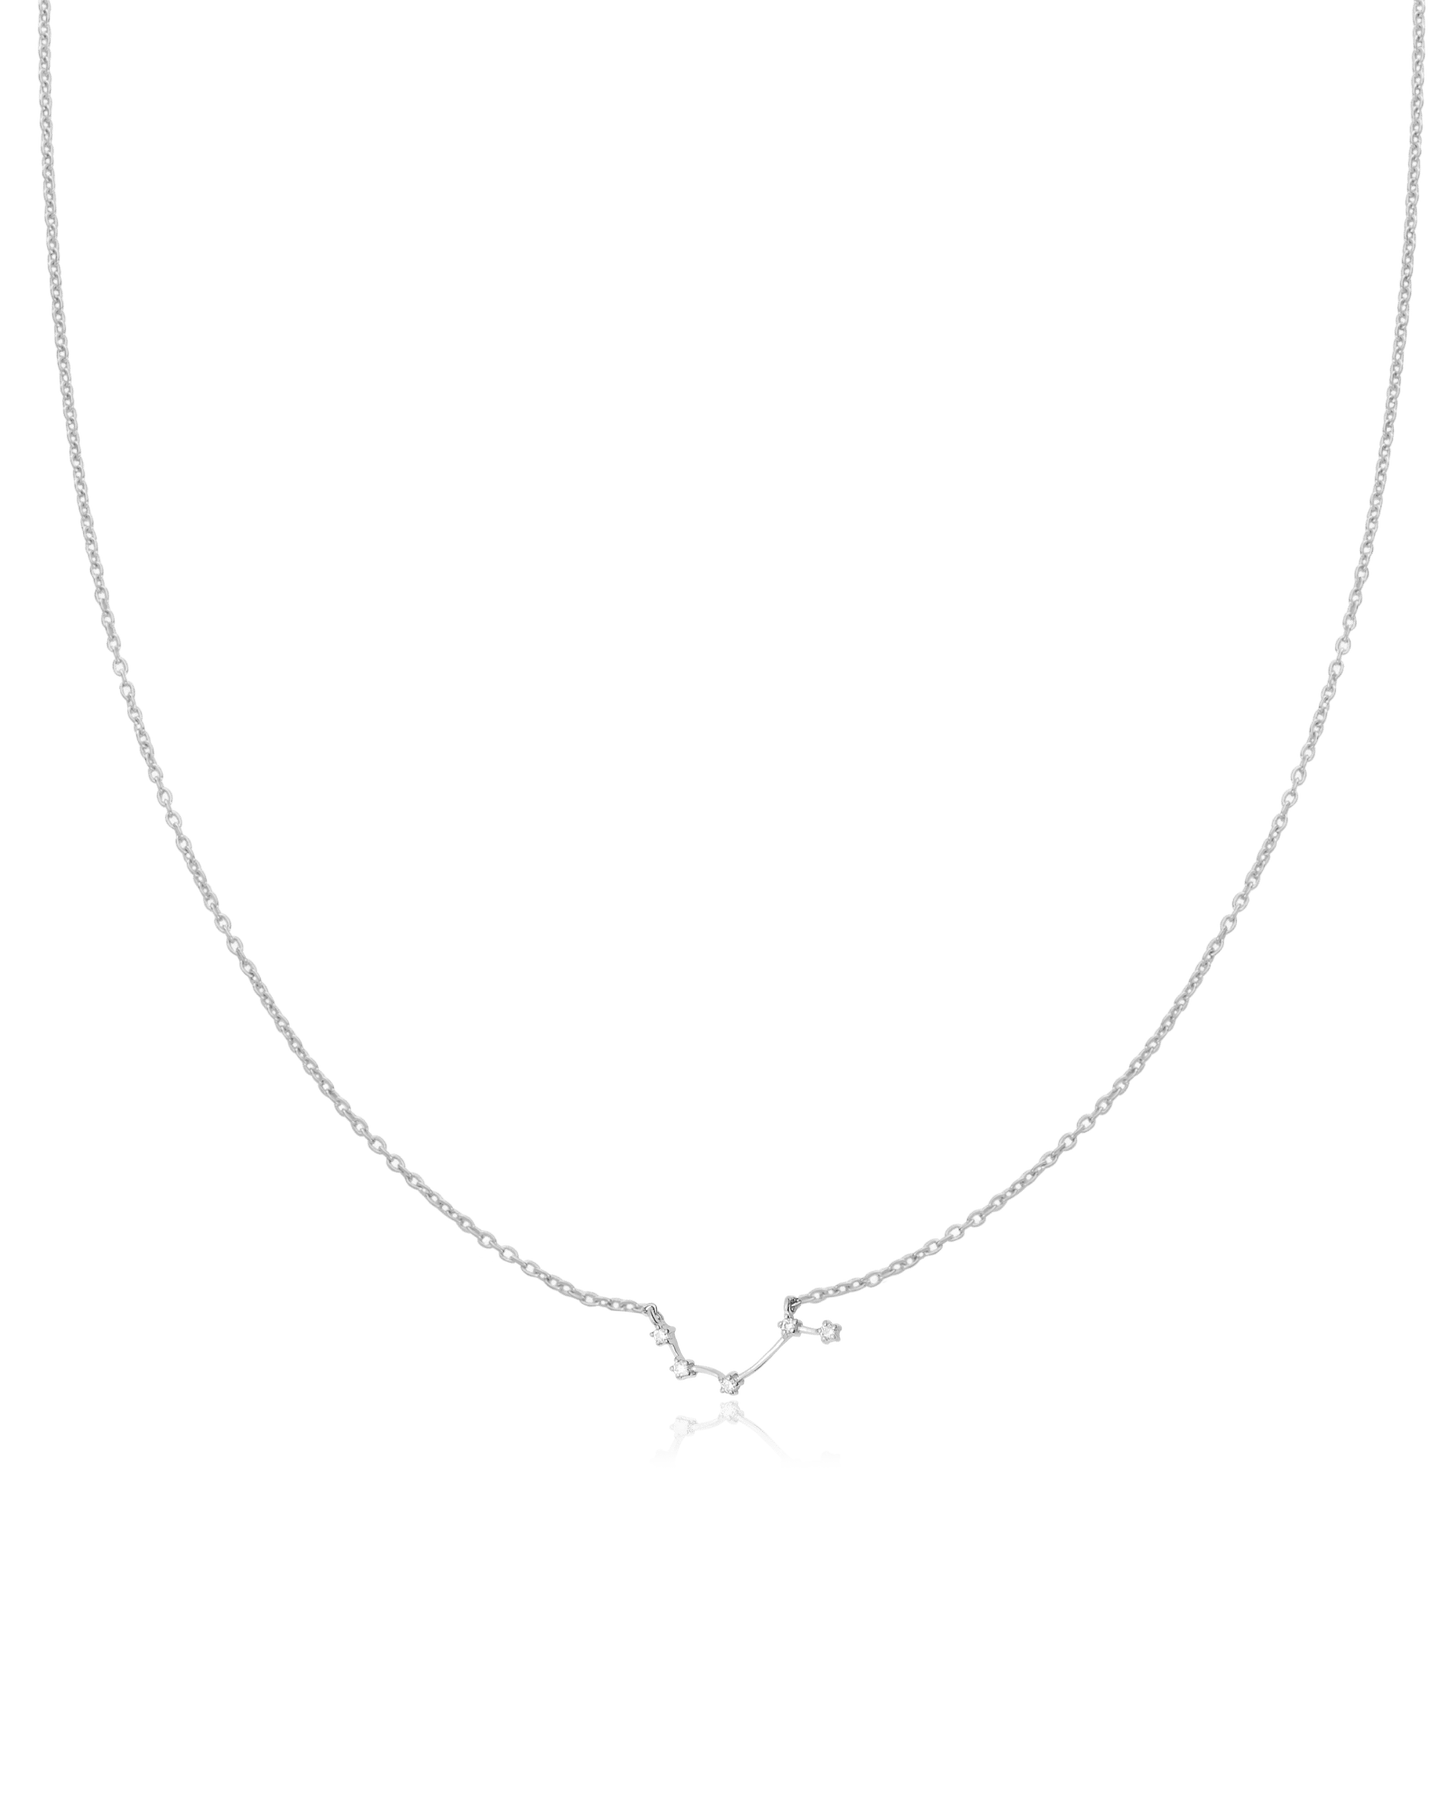 Aries Constellation Necklace - 925 Sterling Silver Necklaces magal-dev 16" 